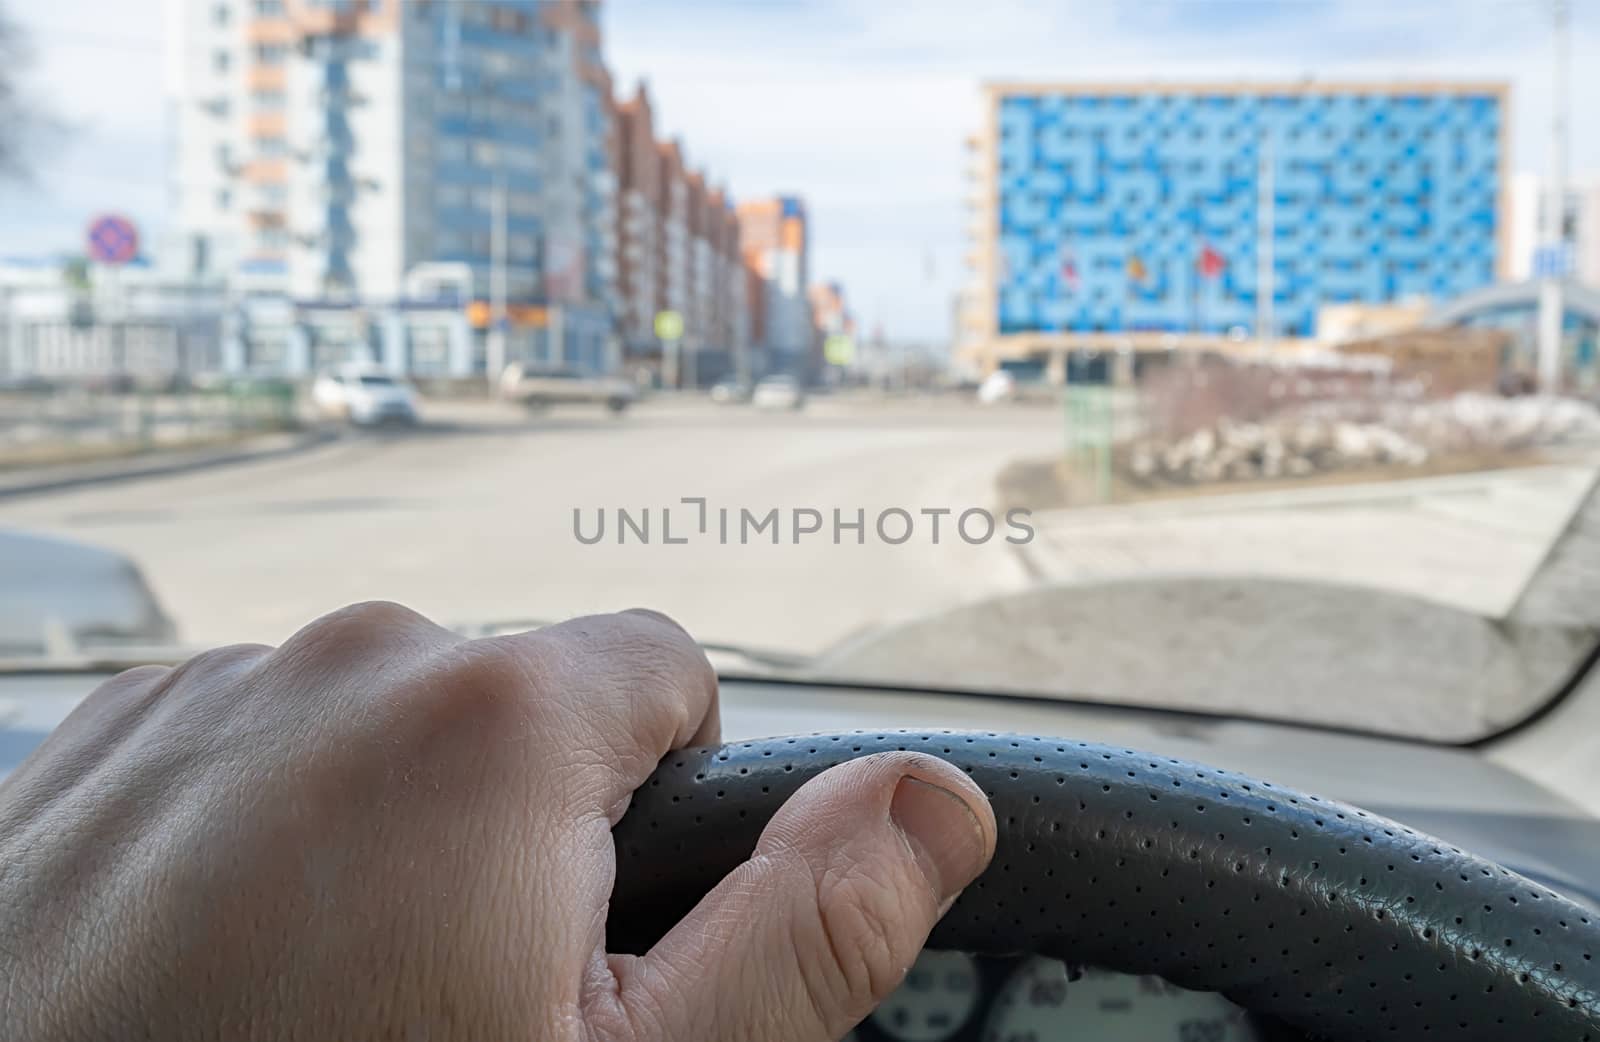 the driver hand on the steering wheel of a car by jk3030